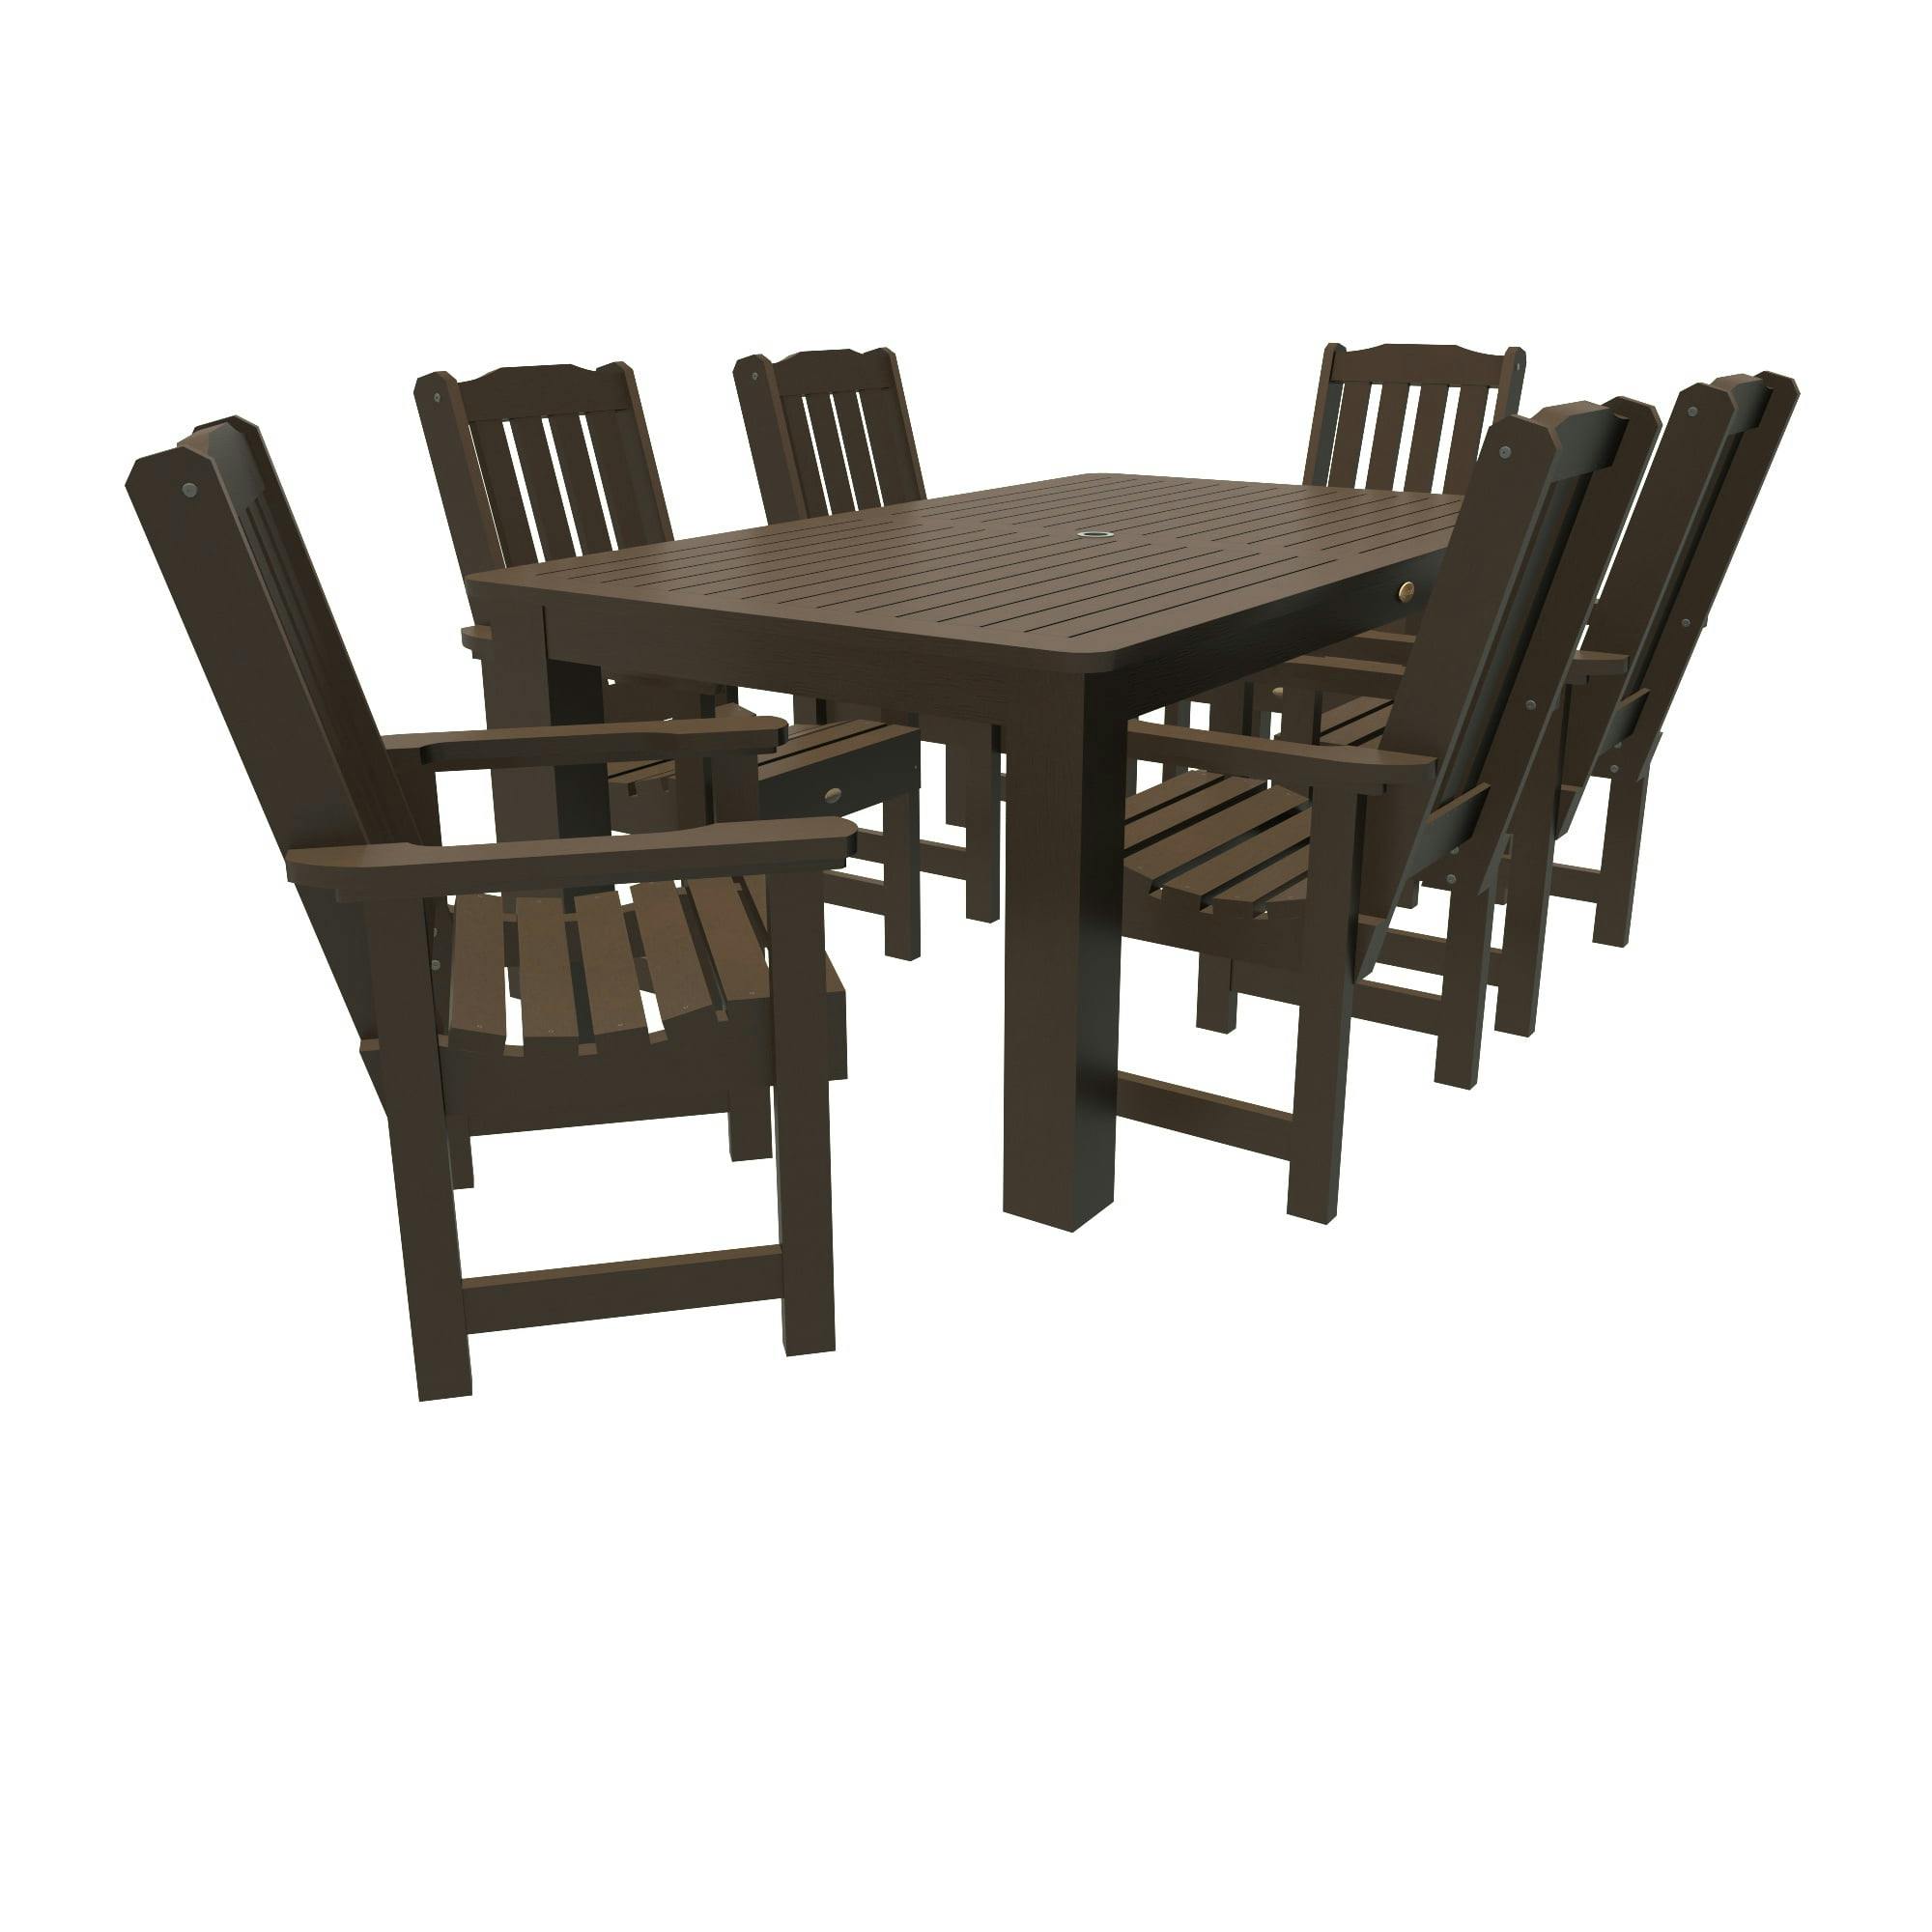 Weathered Acorn Modern 7-Piece Outdoor Dining Set for 6